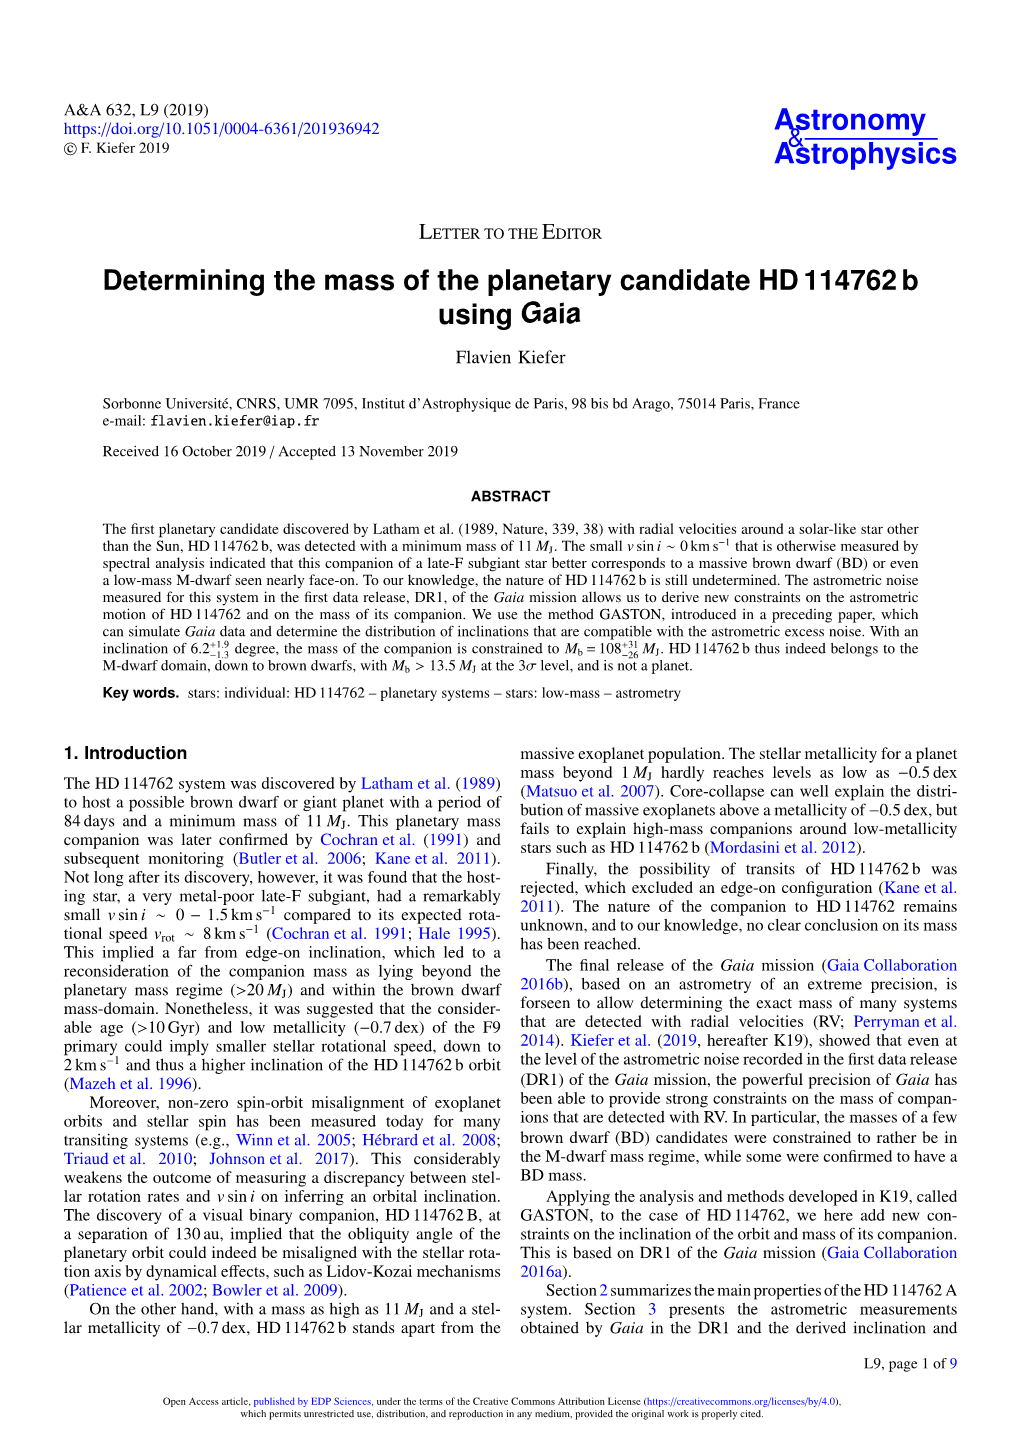 Determining the Mass of the Planetary Candidate HD 114762 B Using Gaia Flavien Kiefer